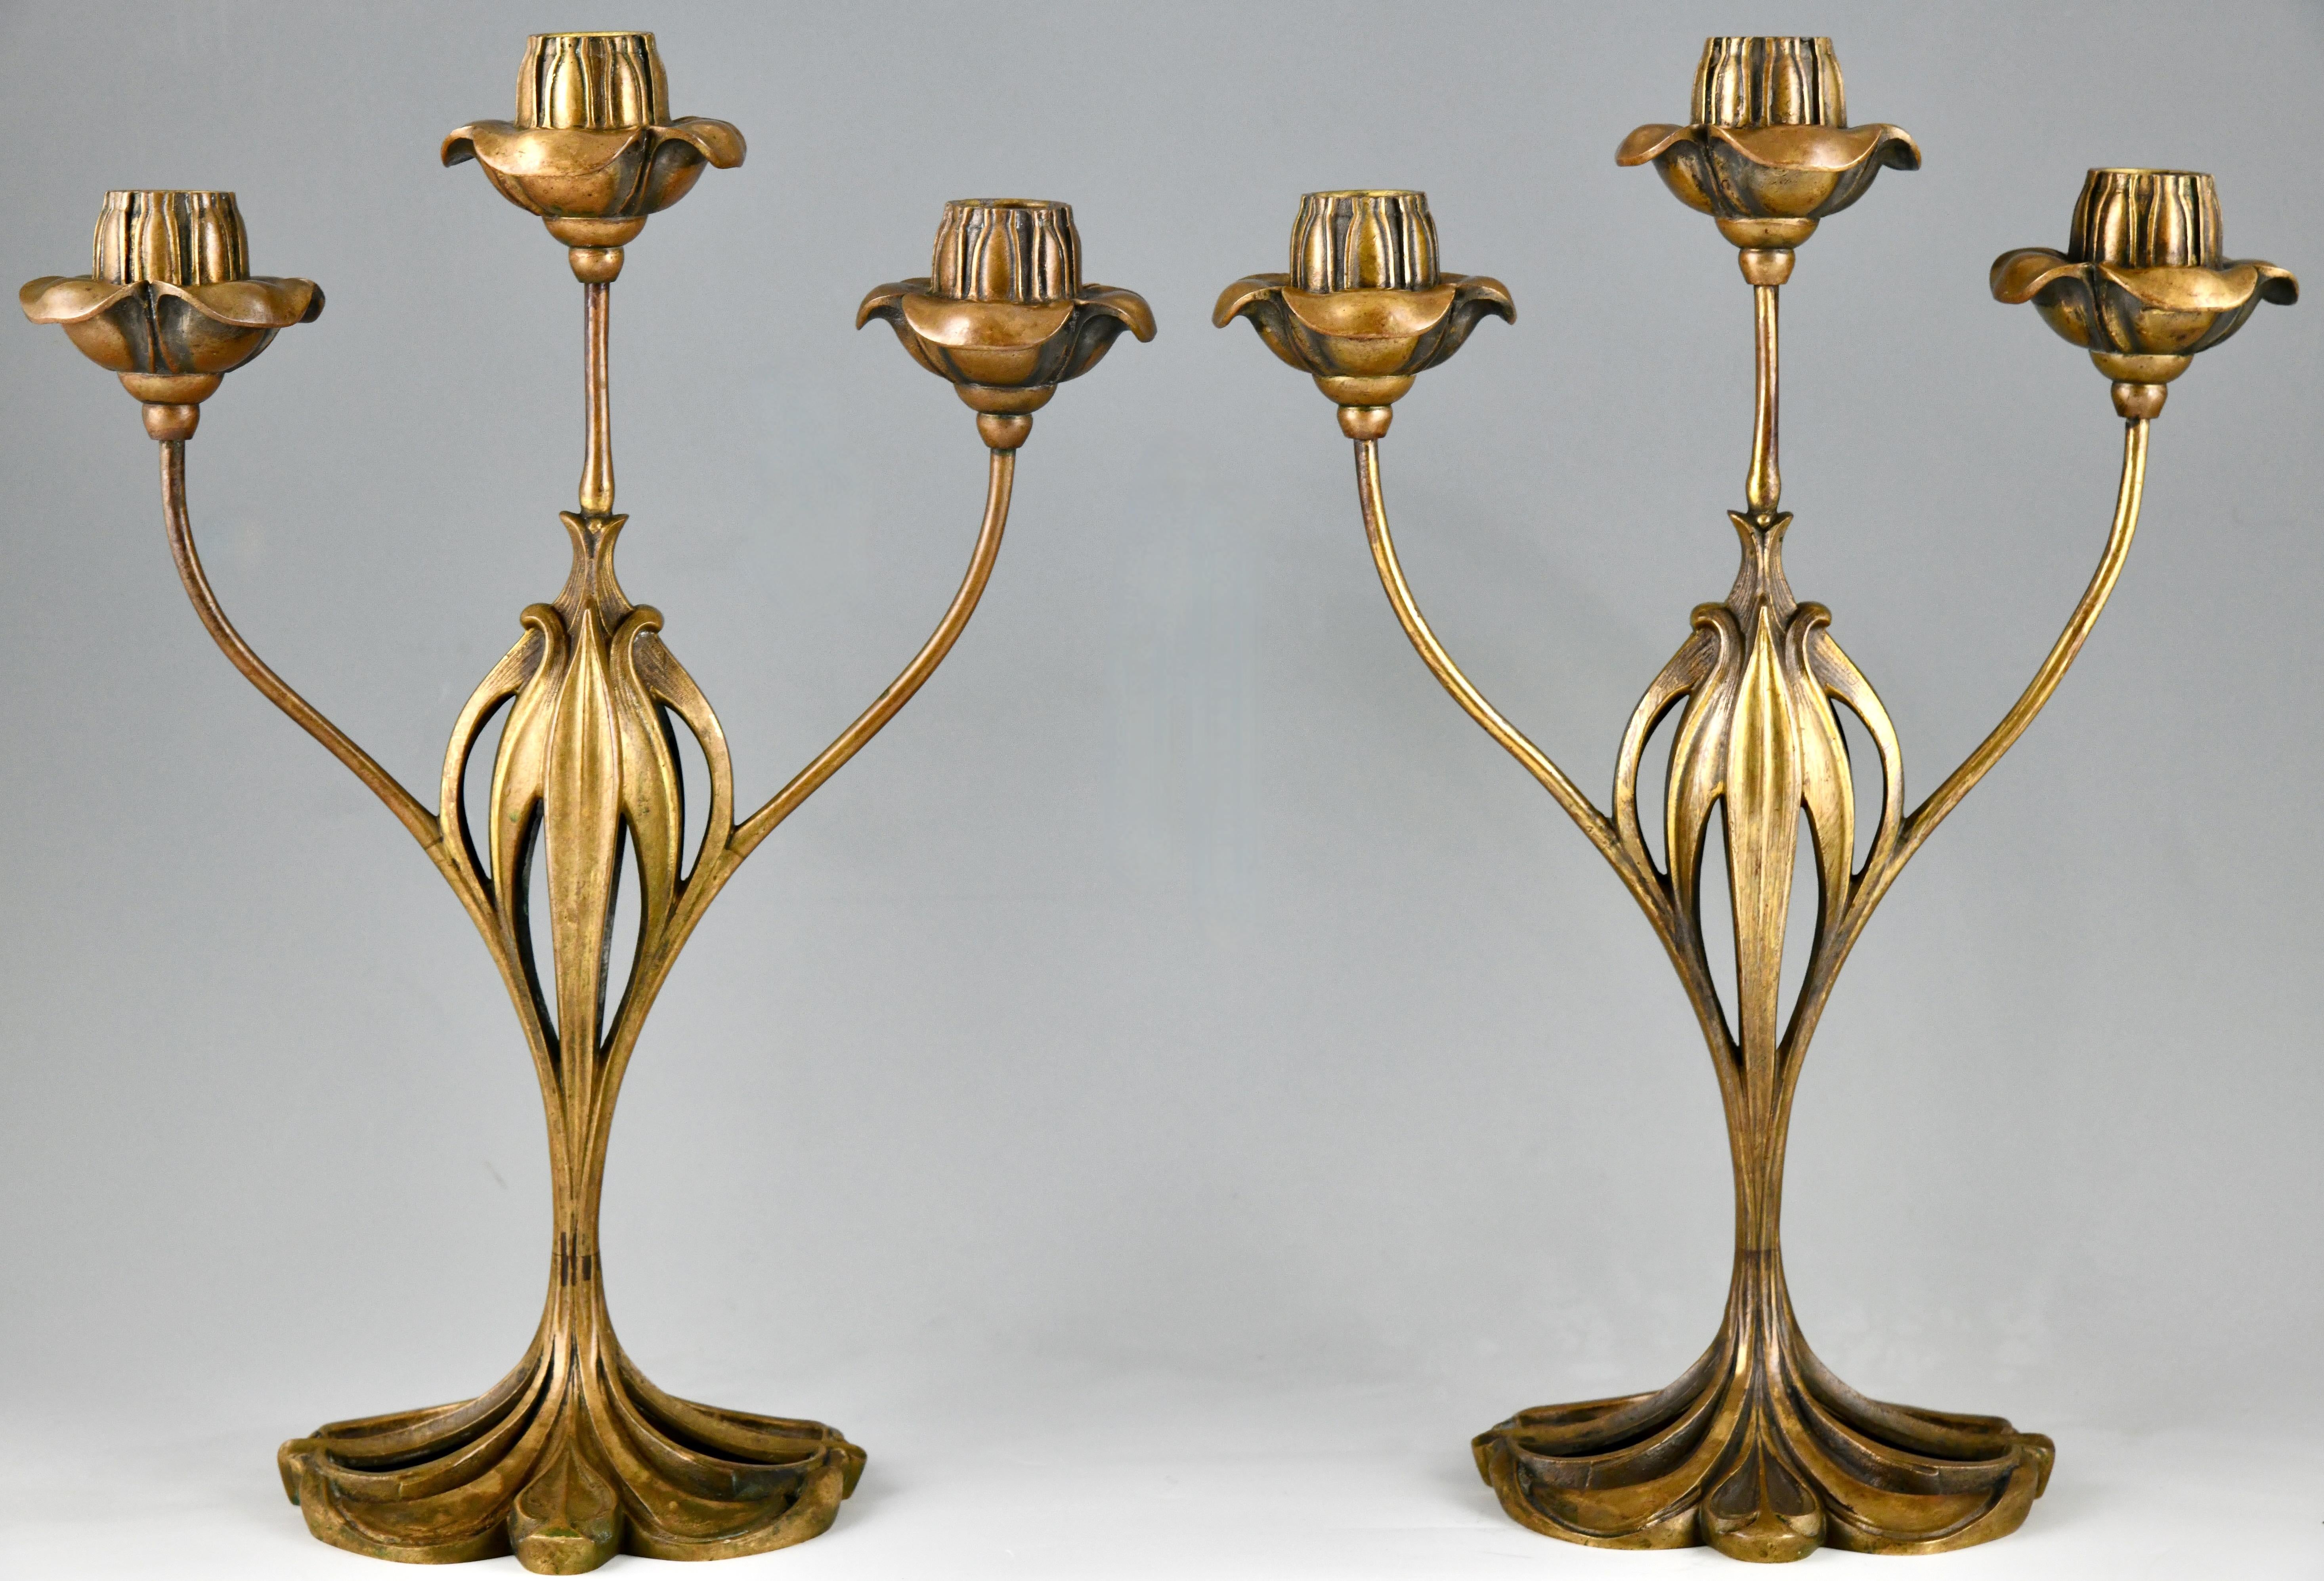 Patinated Pair of bronze Art Nouveau candelabra with floral design by Georges de Feure For Sale